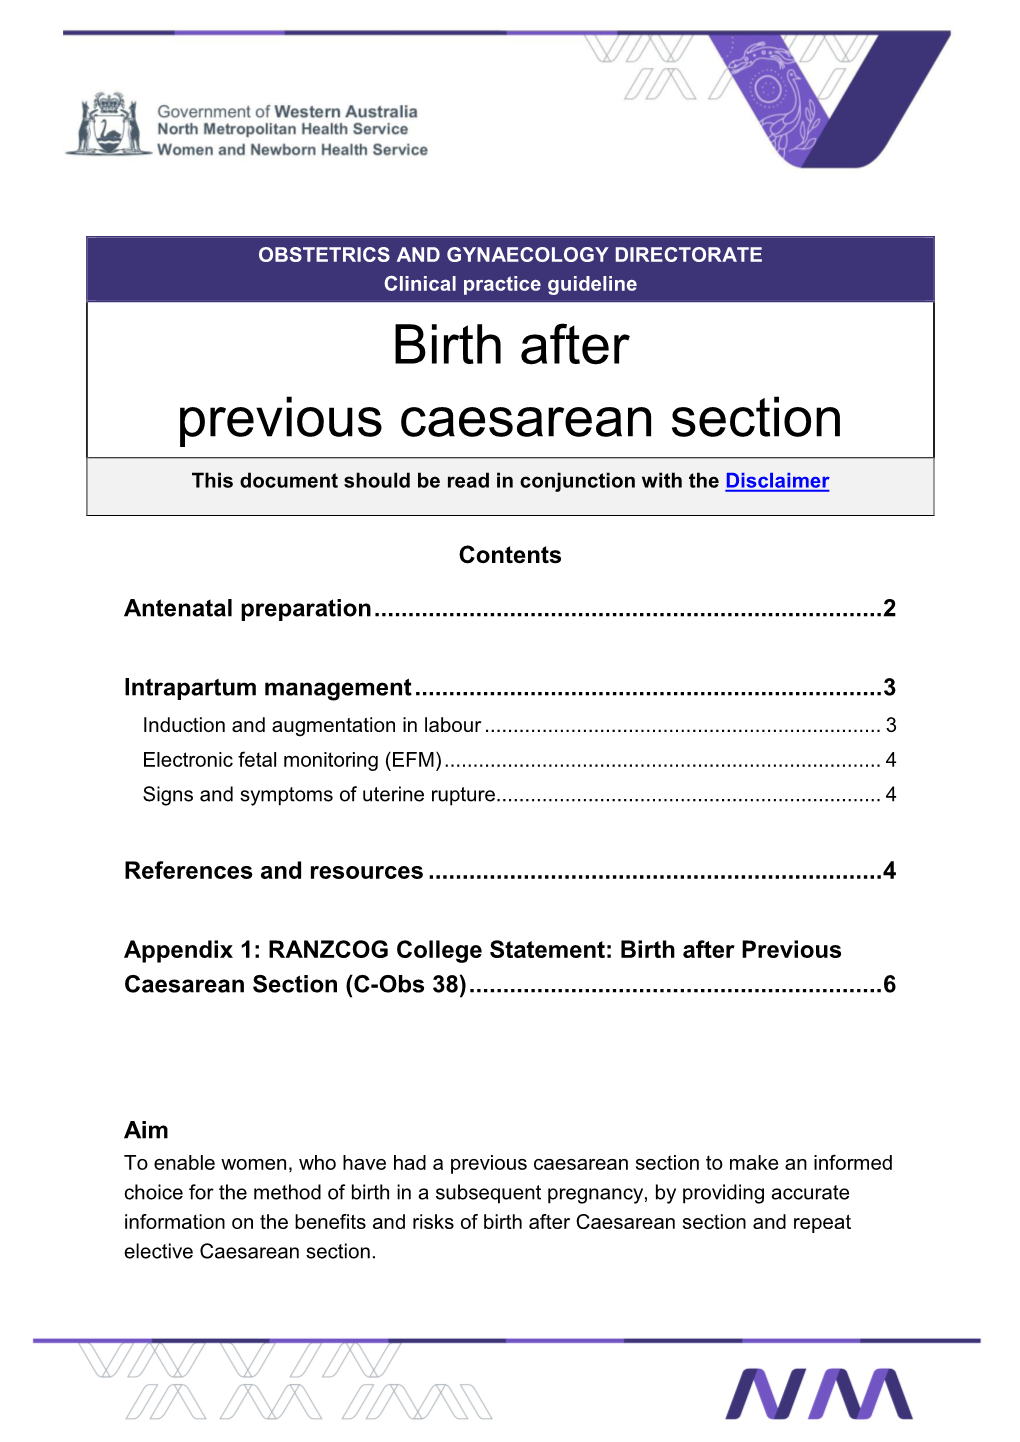 Birth After Previous Caesarean Section This Document Should Be Read in Conjunction with the Disclaimer